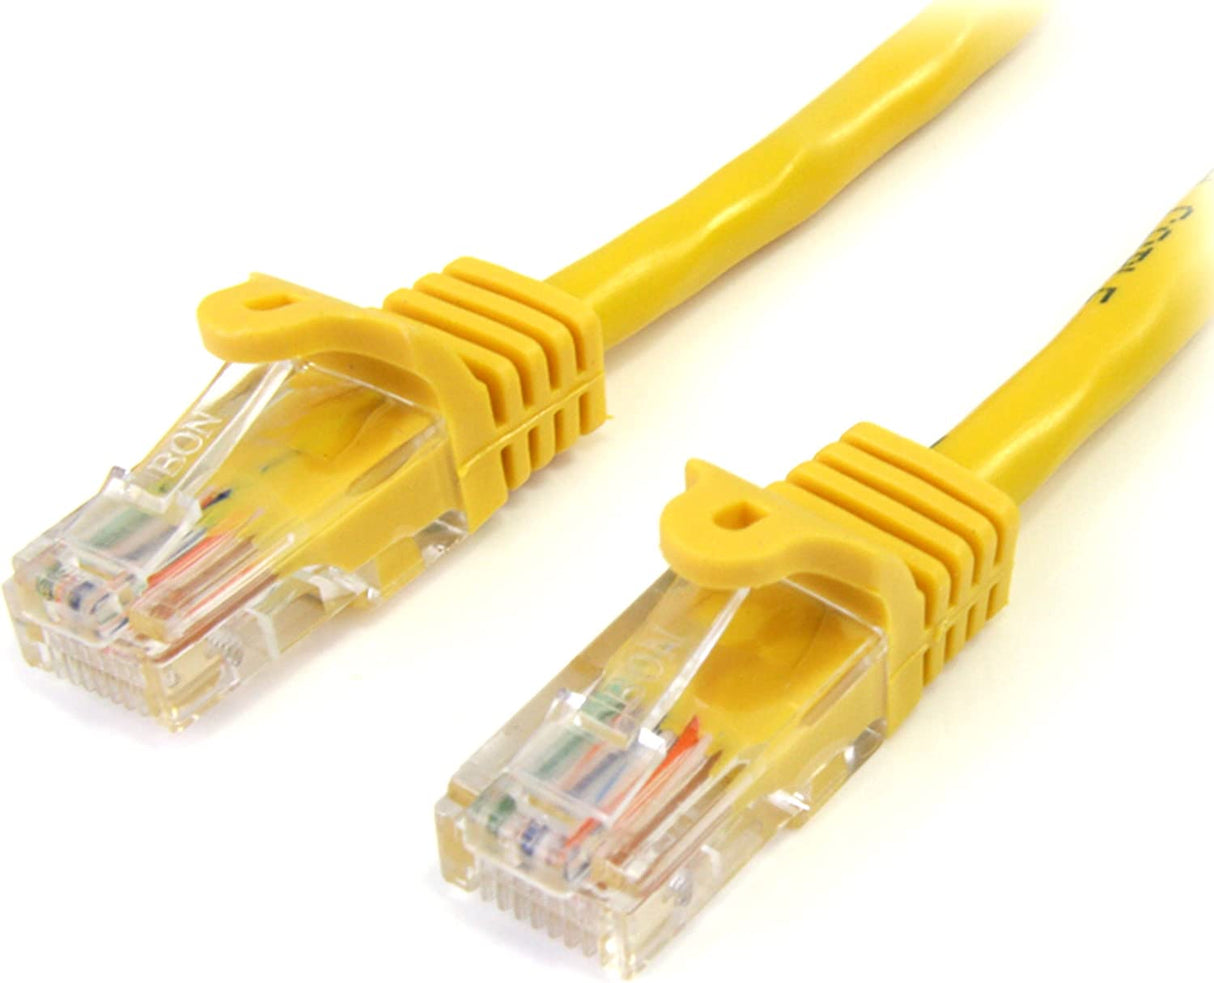 StarTech.com Cat5e Ethernet Cable - 25 ft - Yellow- Patch Cable - Snagless Cat5e Cable - Long Network Cable - Ethernet Cord - Cat 5e Cable - 25ft (45PATCH25YL) 25 ft / 7.5m Yellow